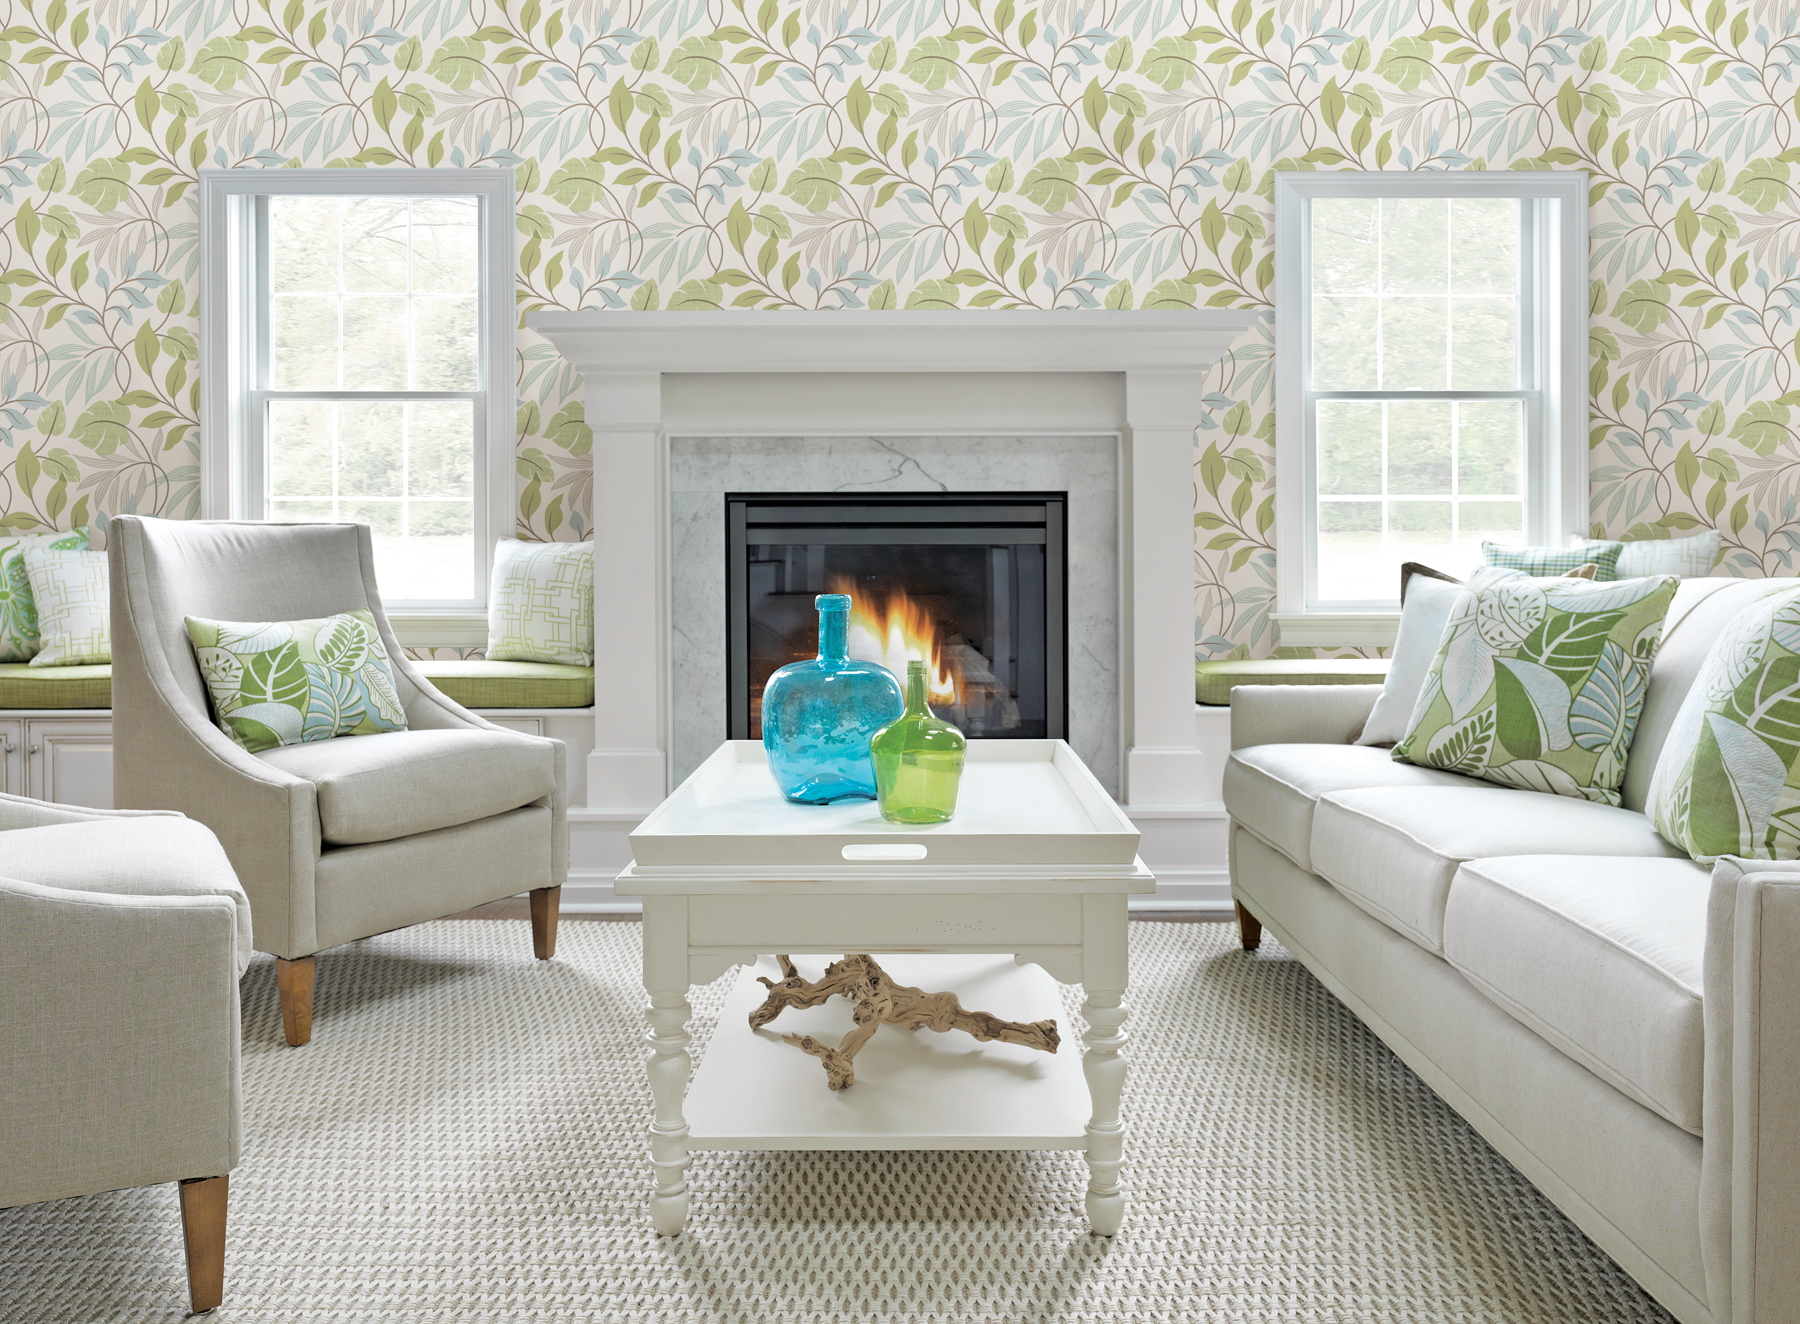 Make it Modern with Wallpaper - Brewster Home